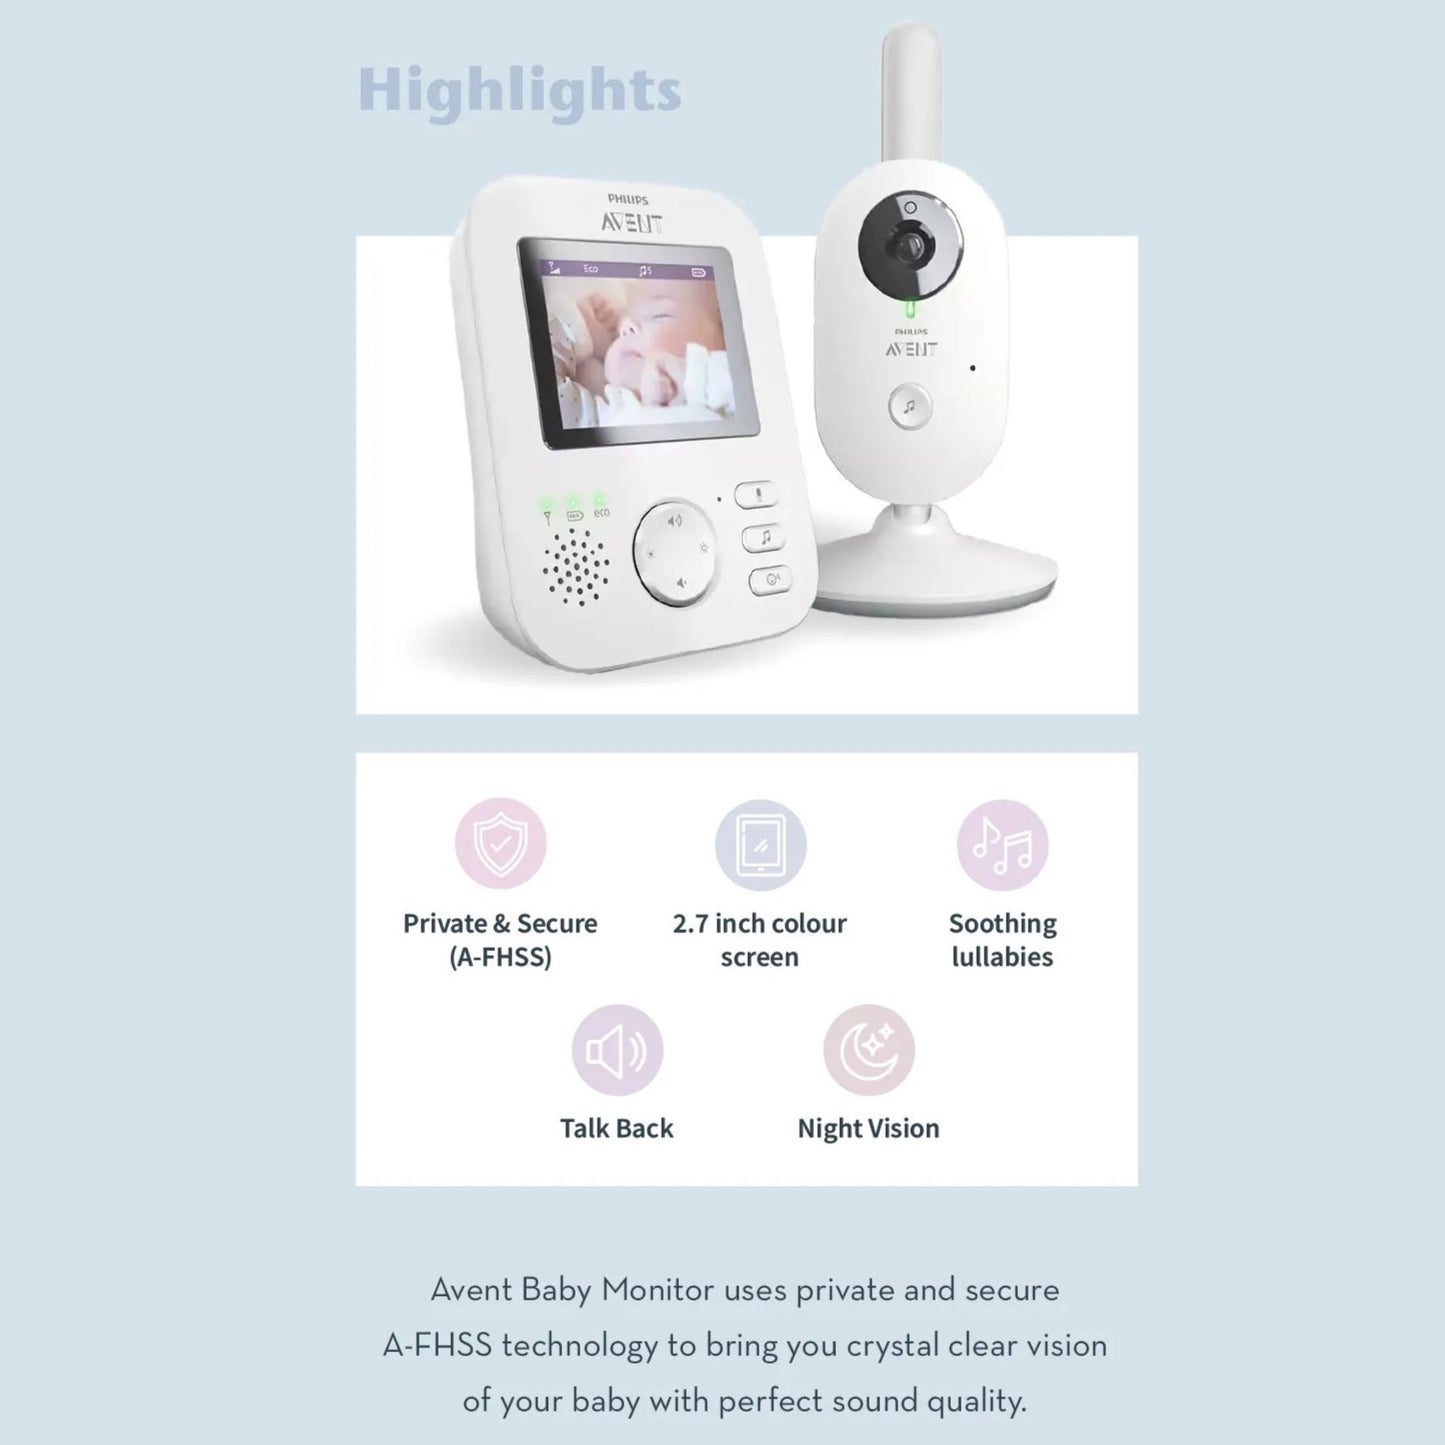 Philips Avent Digital Video Baby Monitor - SCD833/05